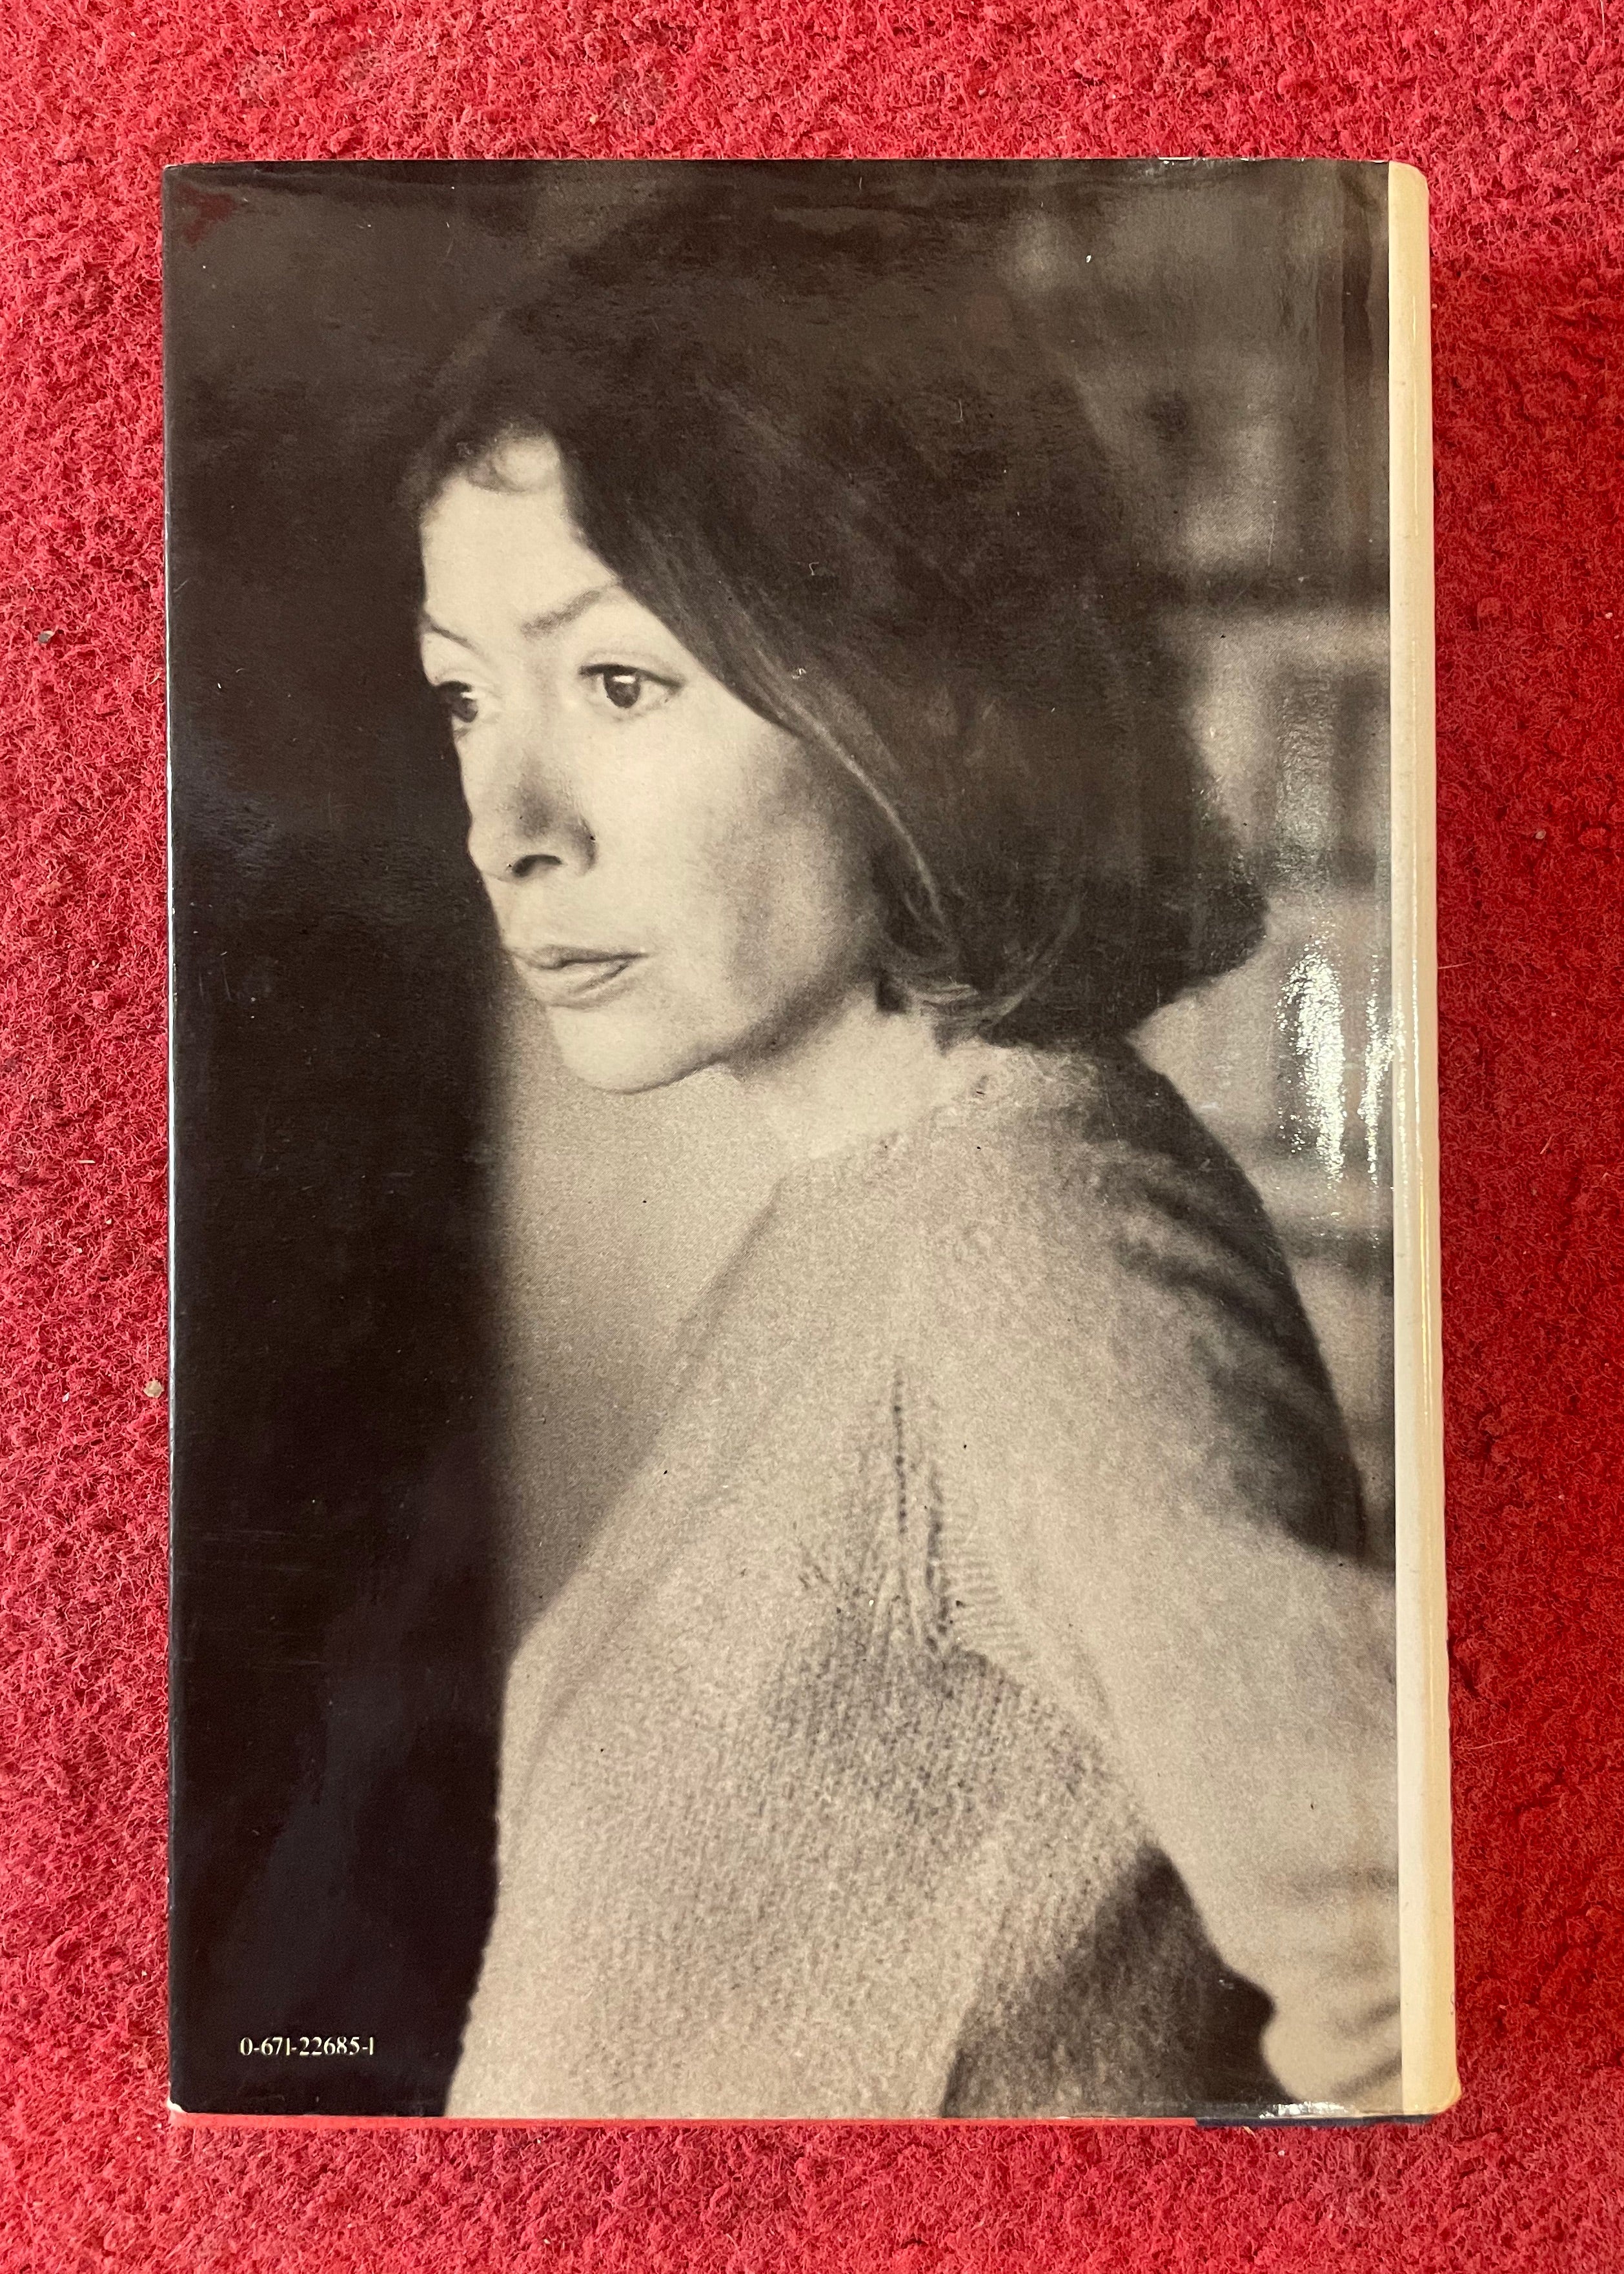 First Edition "The White Album" by Joan Didion*